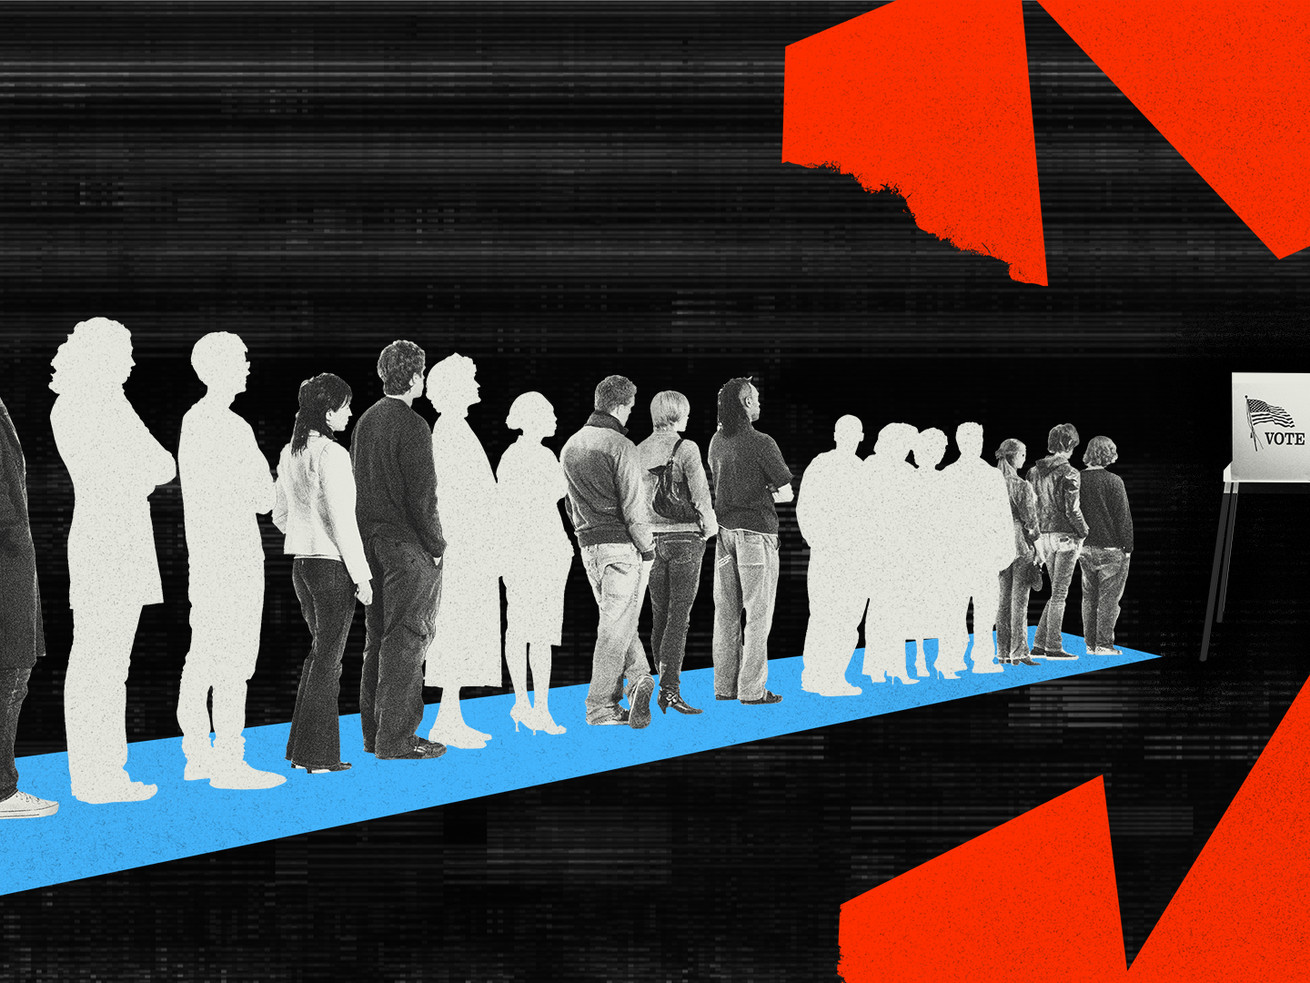 A line of people on a bright blue path wait to vote at a voting booth. Some are just silhouettes with static. A glitching screen is in the background.